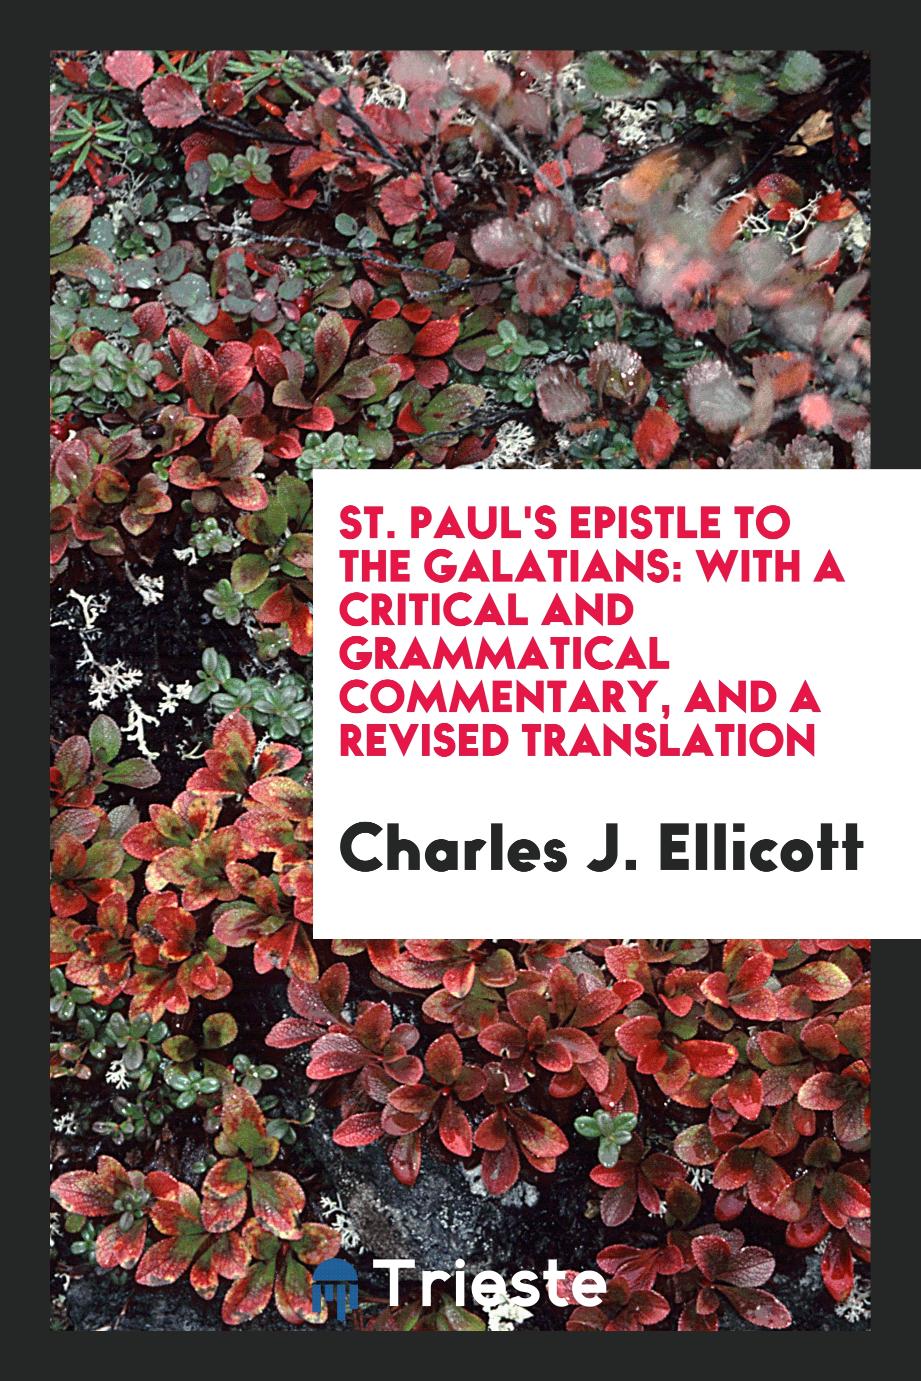 St. Paul's Epistle to the Galatians: With a Critical and Grammatical Commentary, and a Revised Translation